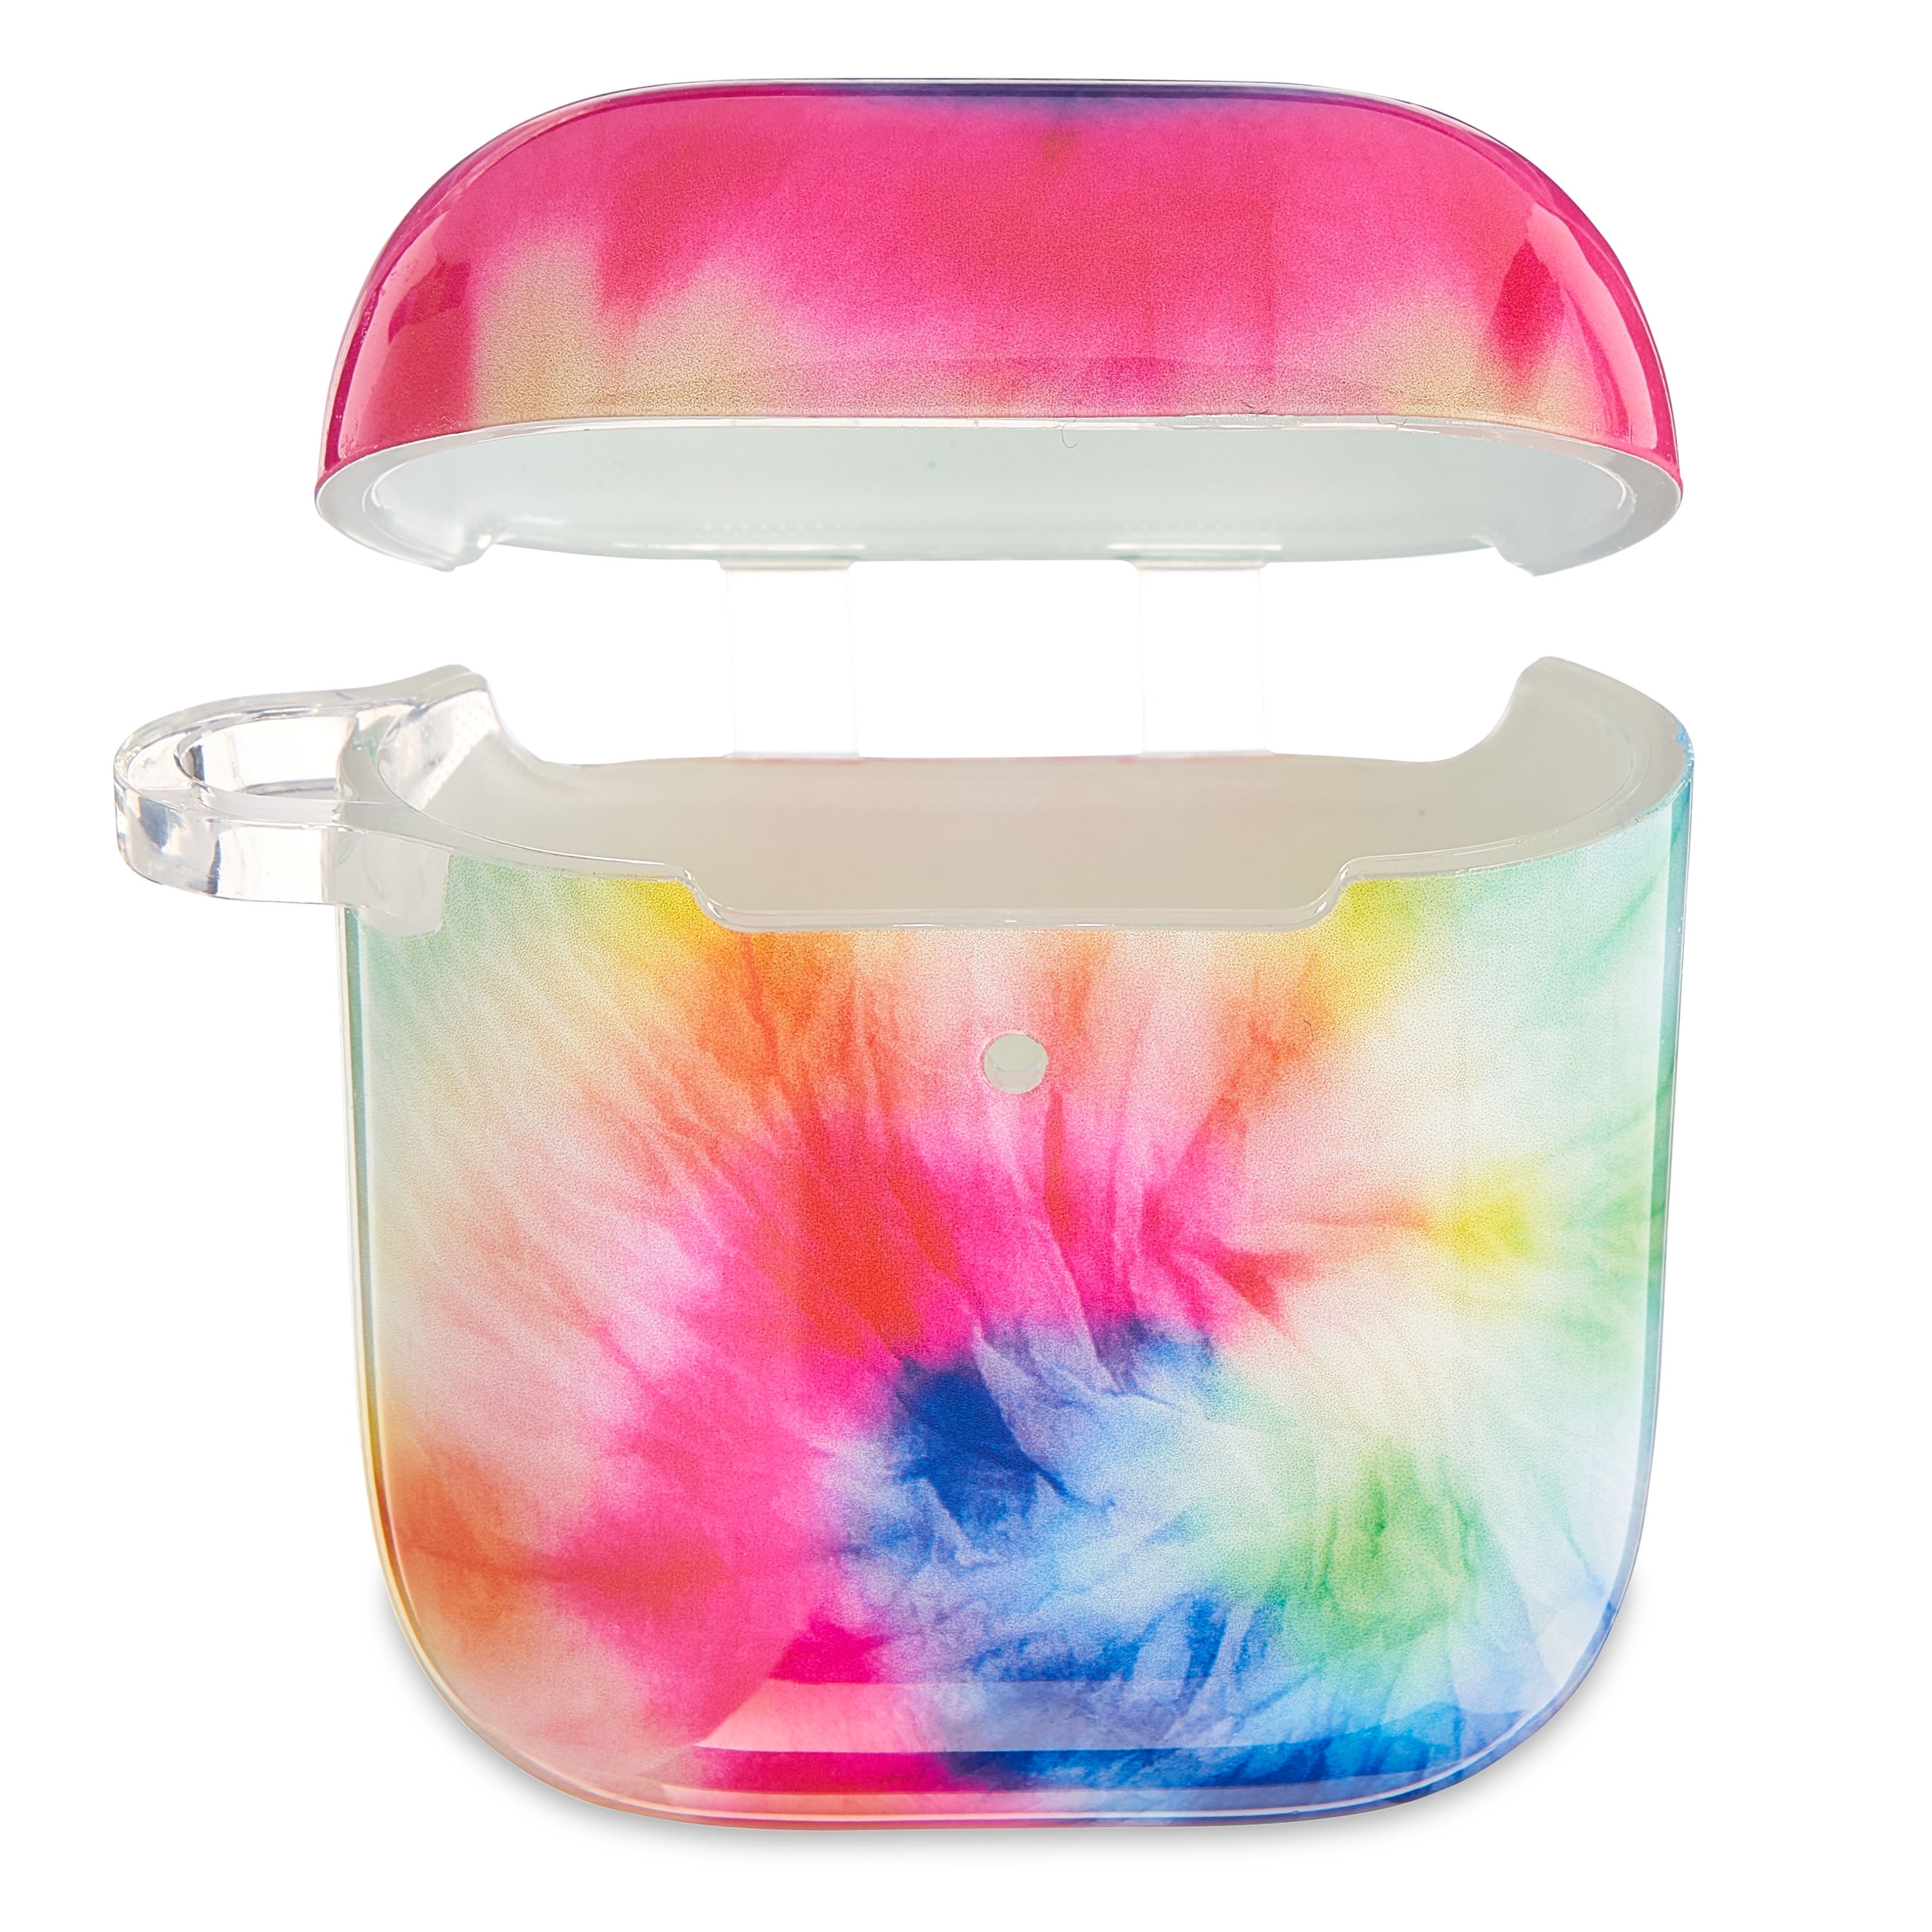 onn. Charging Case Cover for Apple Airpods (1st and 2nd generation), Tie Dye